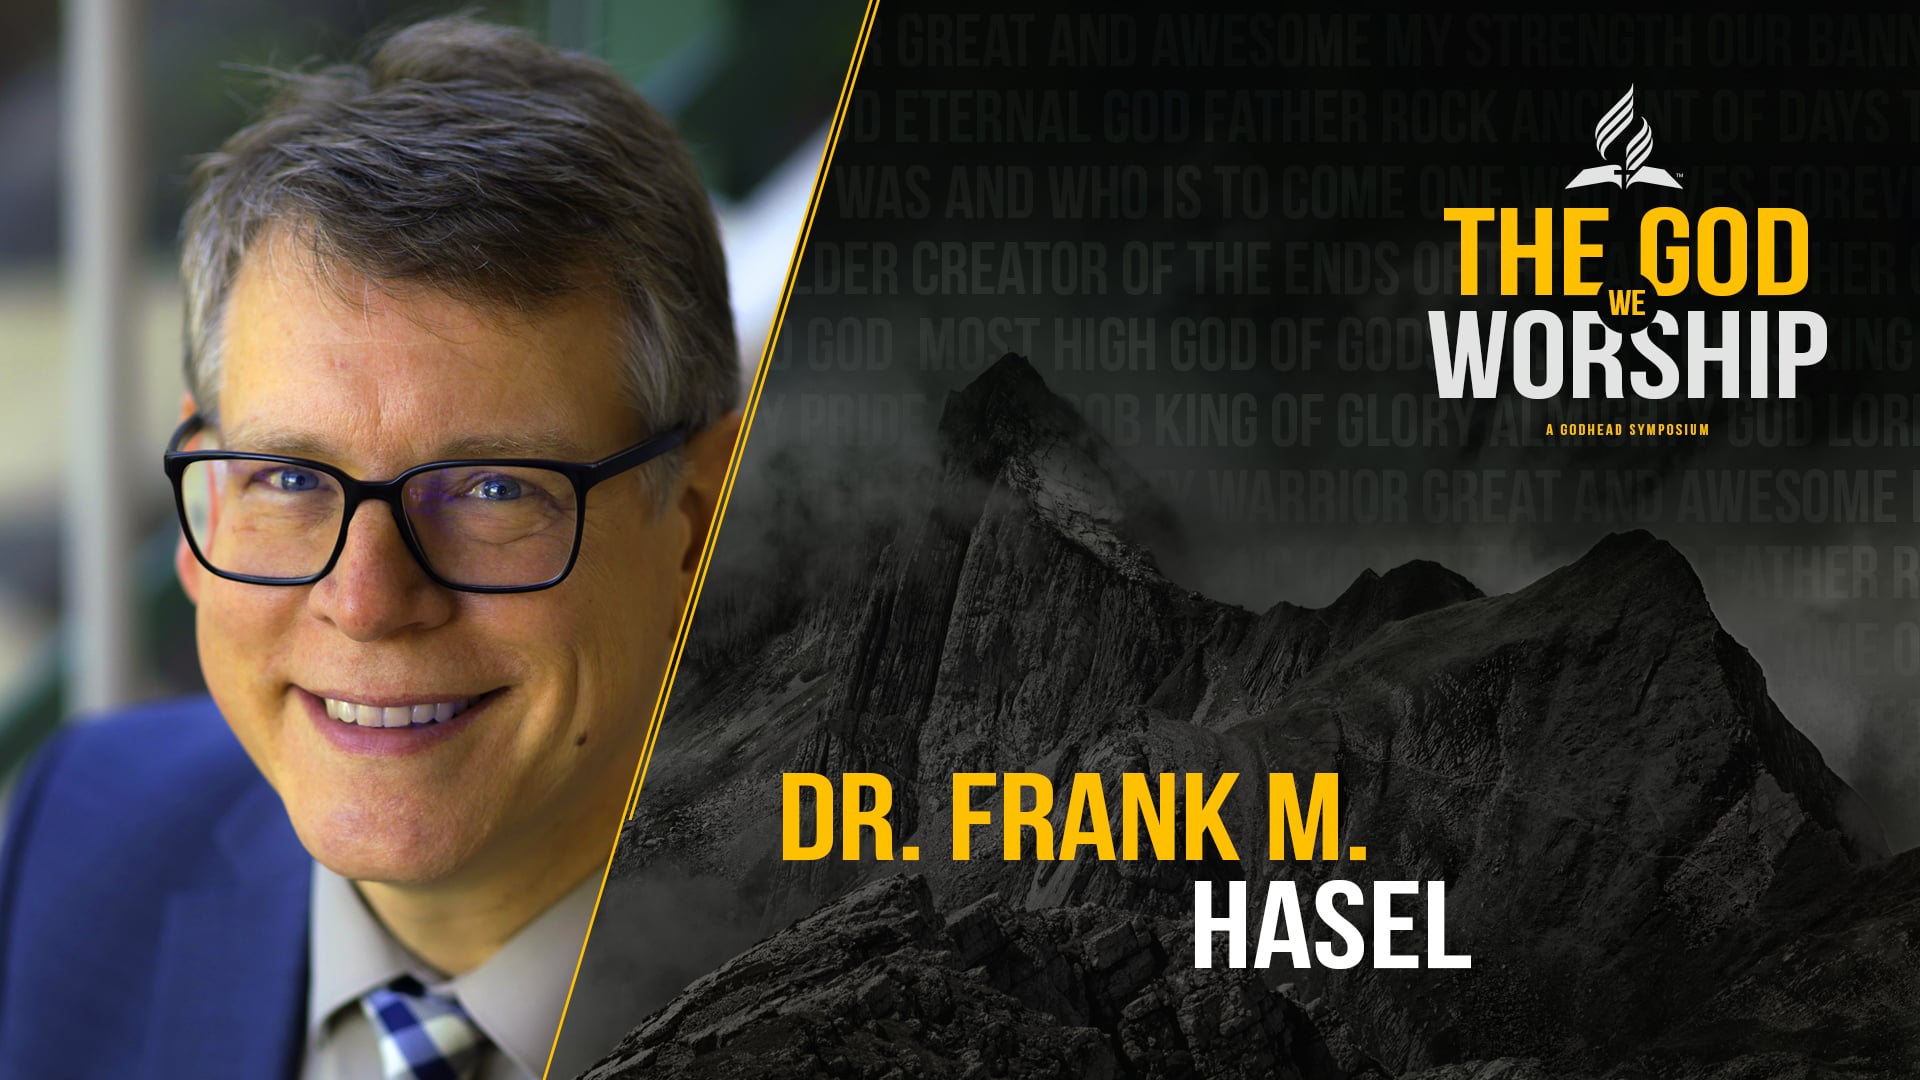 “The Amazing Work of the Holy Spirit” by Dr. Frank Hasel